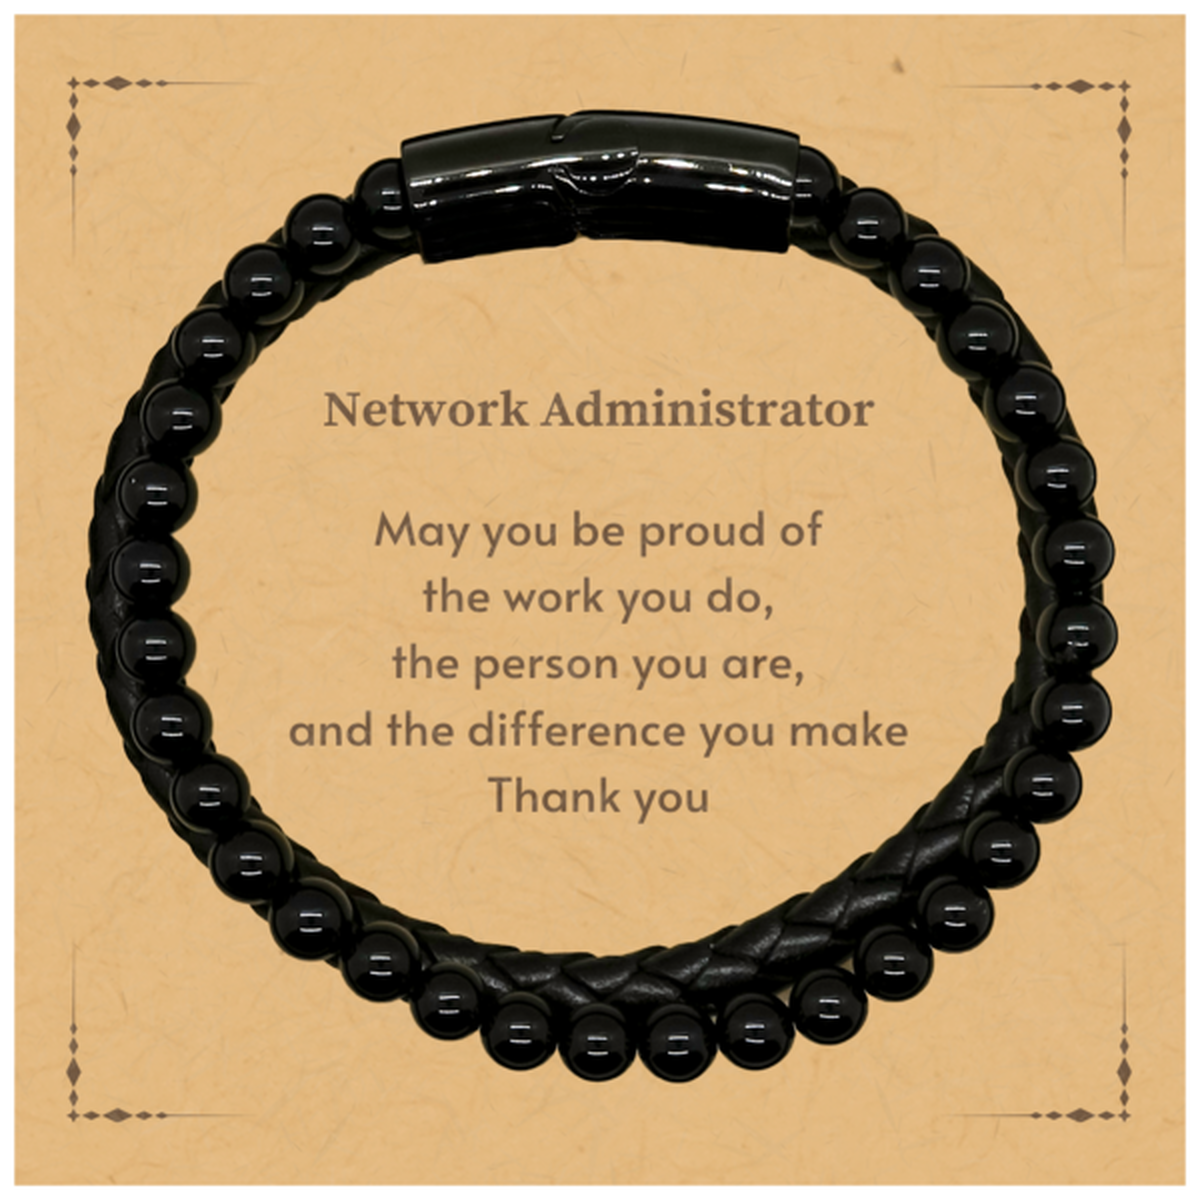 Heartwarming Stone Leather Bracelets Retirement Coworkers Gifts for Network Administrator, Network Administrator May You be proud of the work you do, the person you are Gifts for Boss Men Women Friends